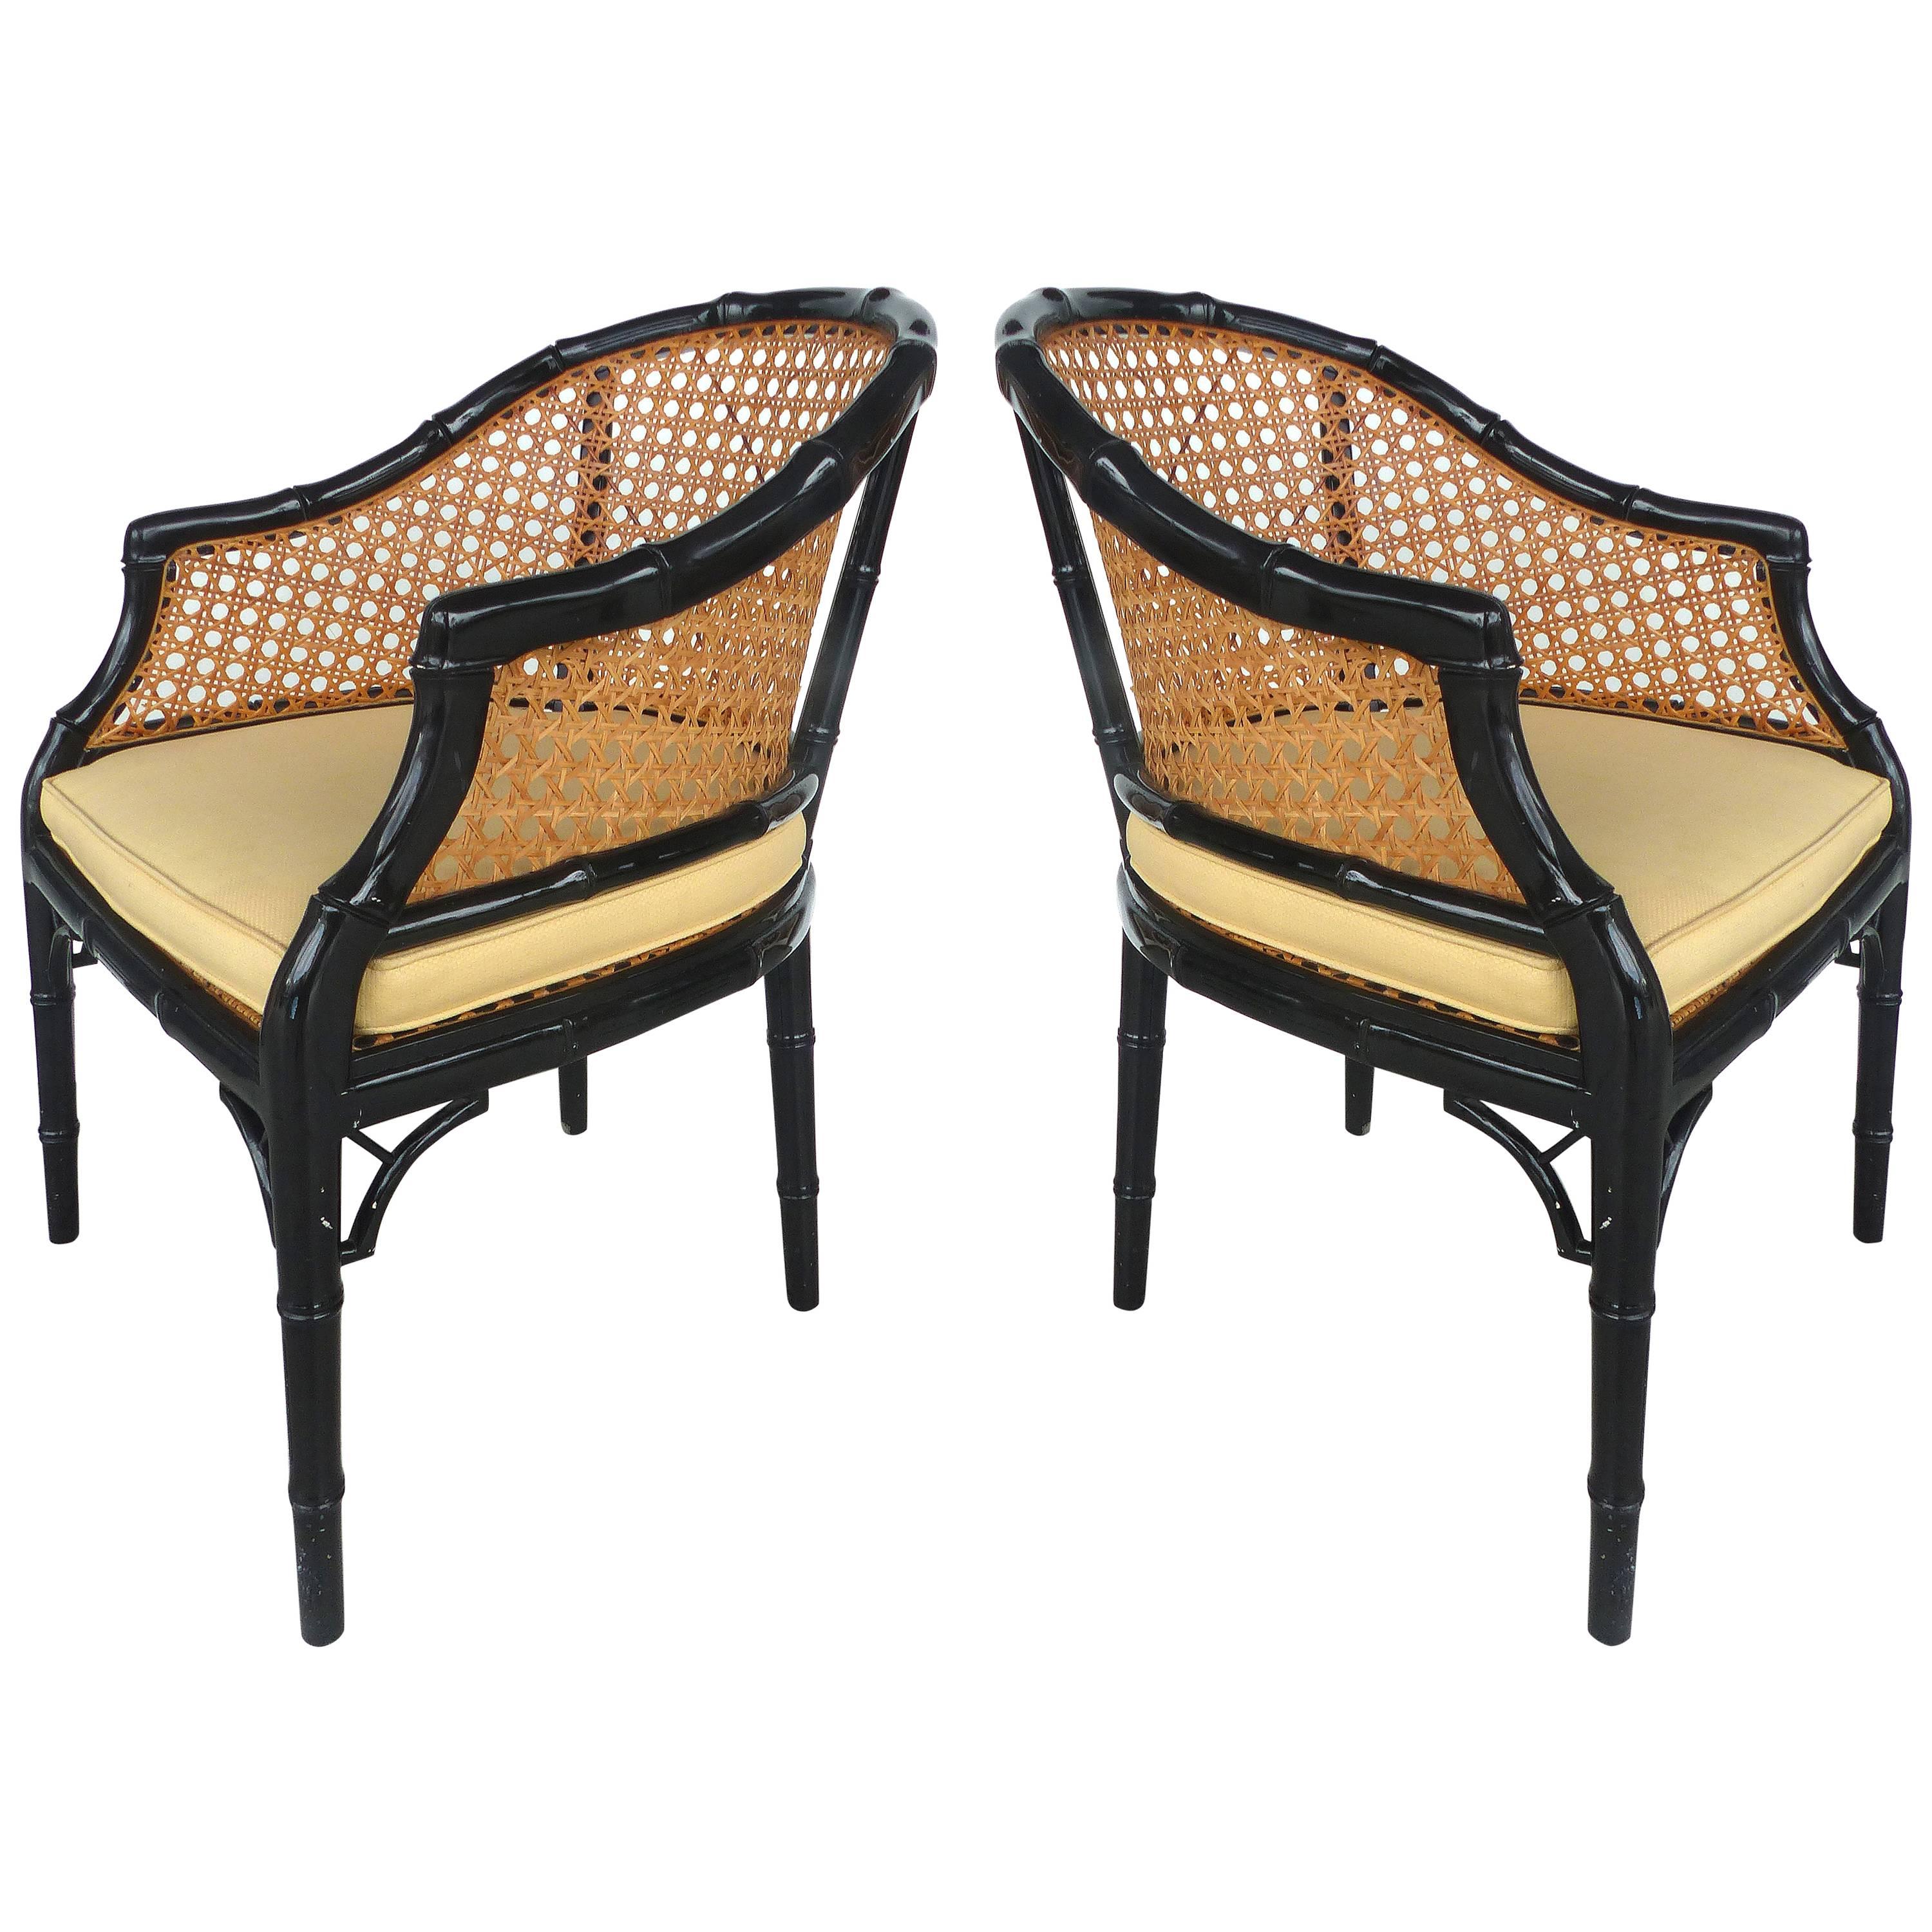 Vintage Pair of Lacquered Faux-Bamboo and Cane Chairs